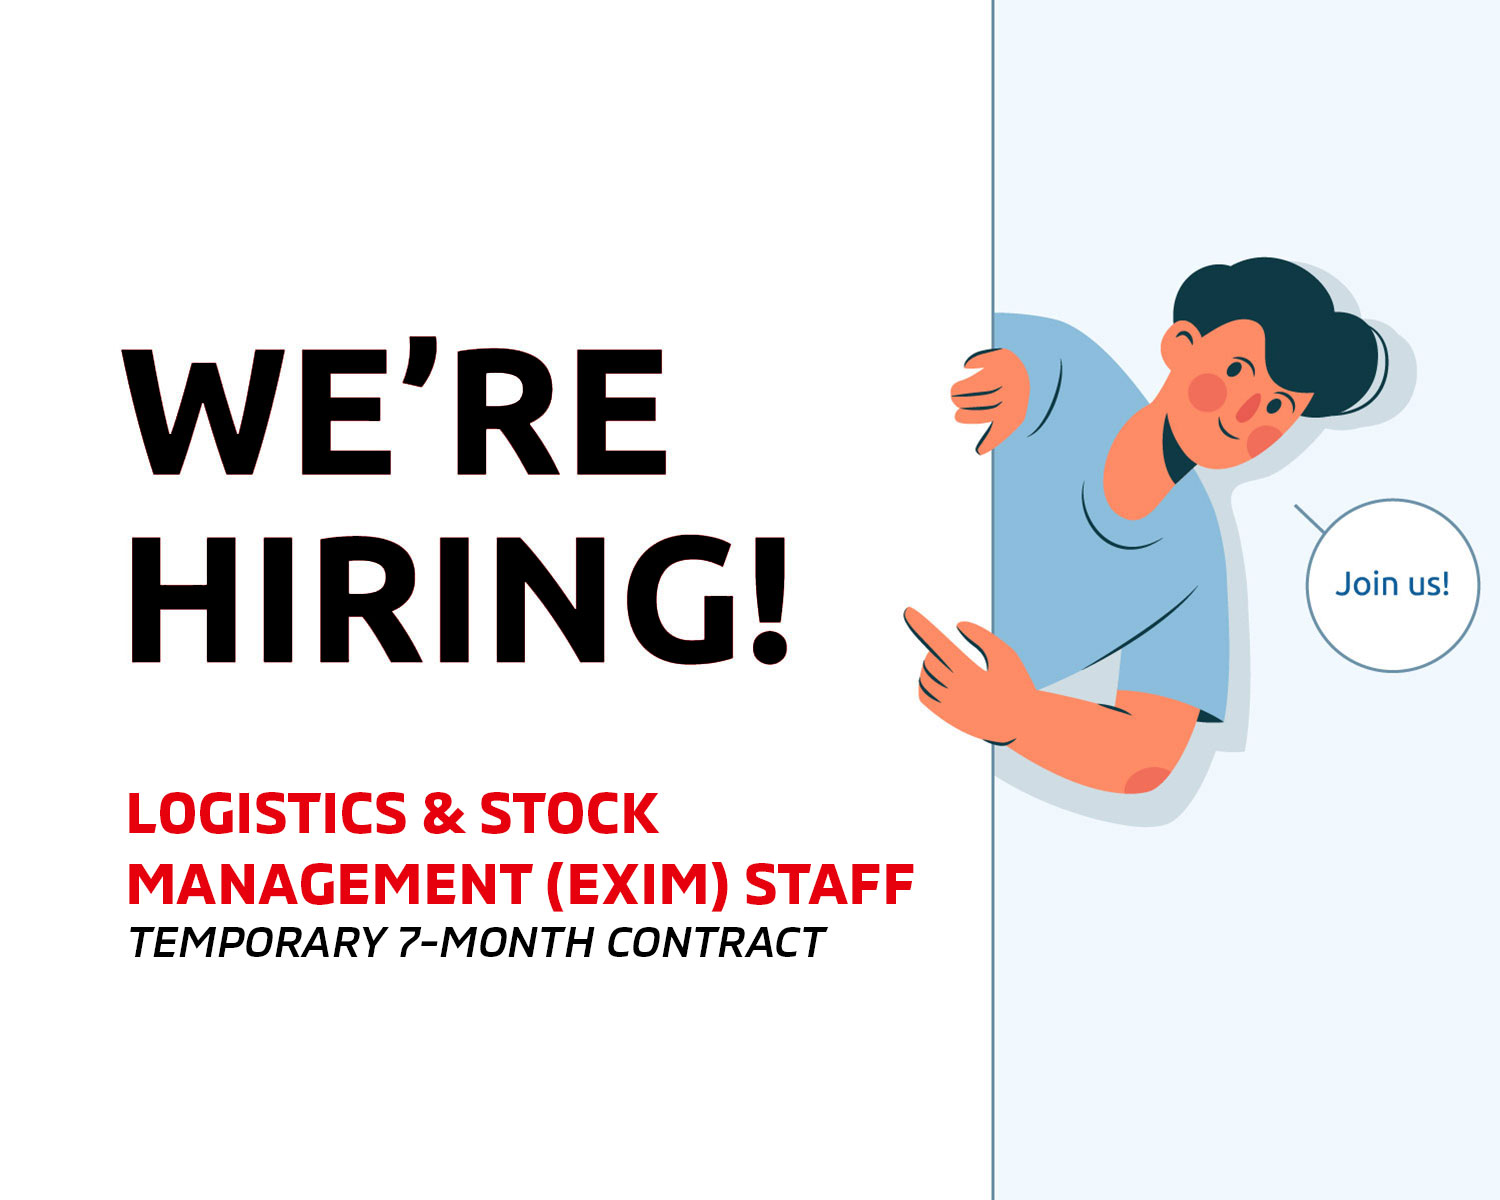 LOGISTICS & STOCK MANAGEMENT (EXIM) STAFF – TEMPORARY 7-MONTH CONTRACT